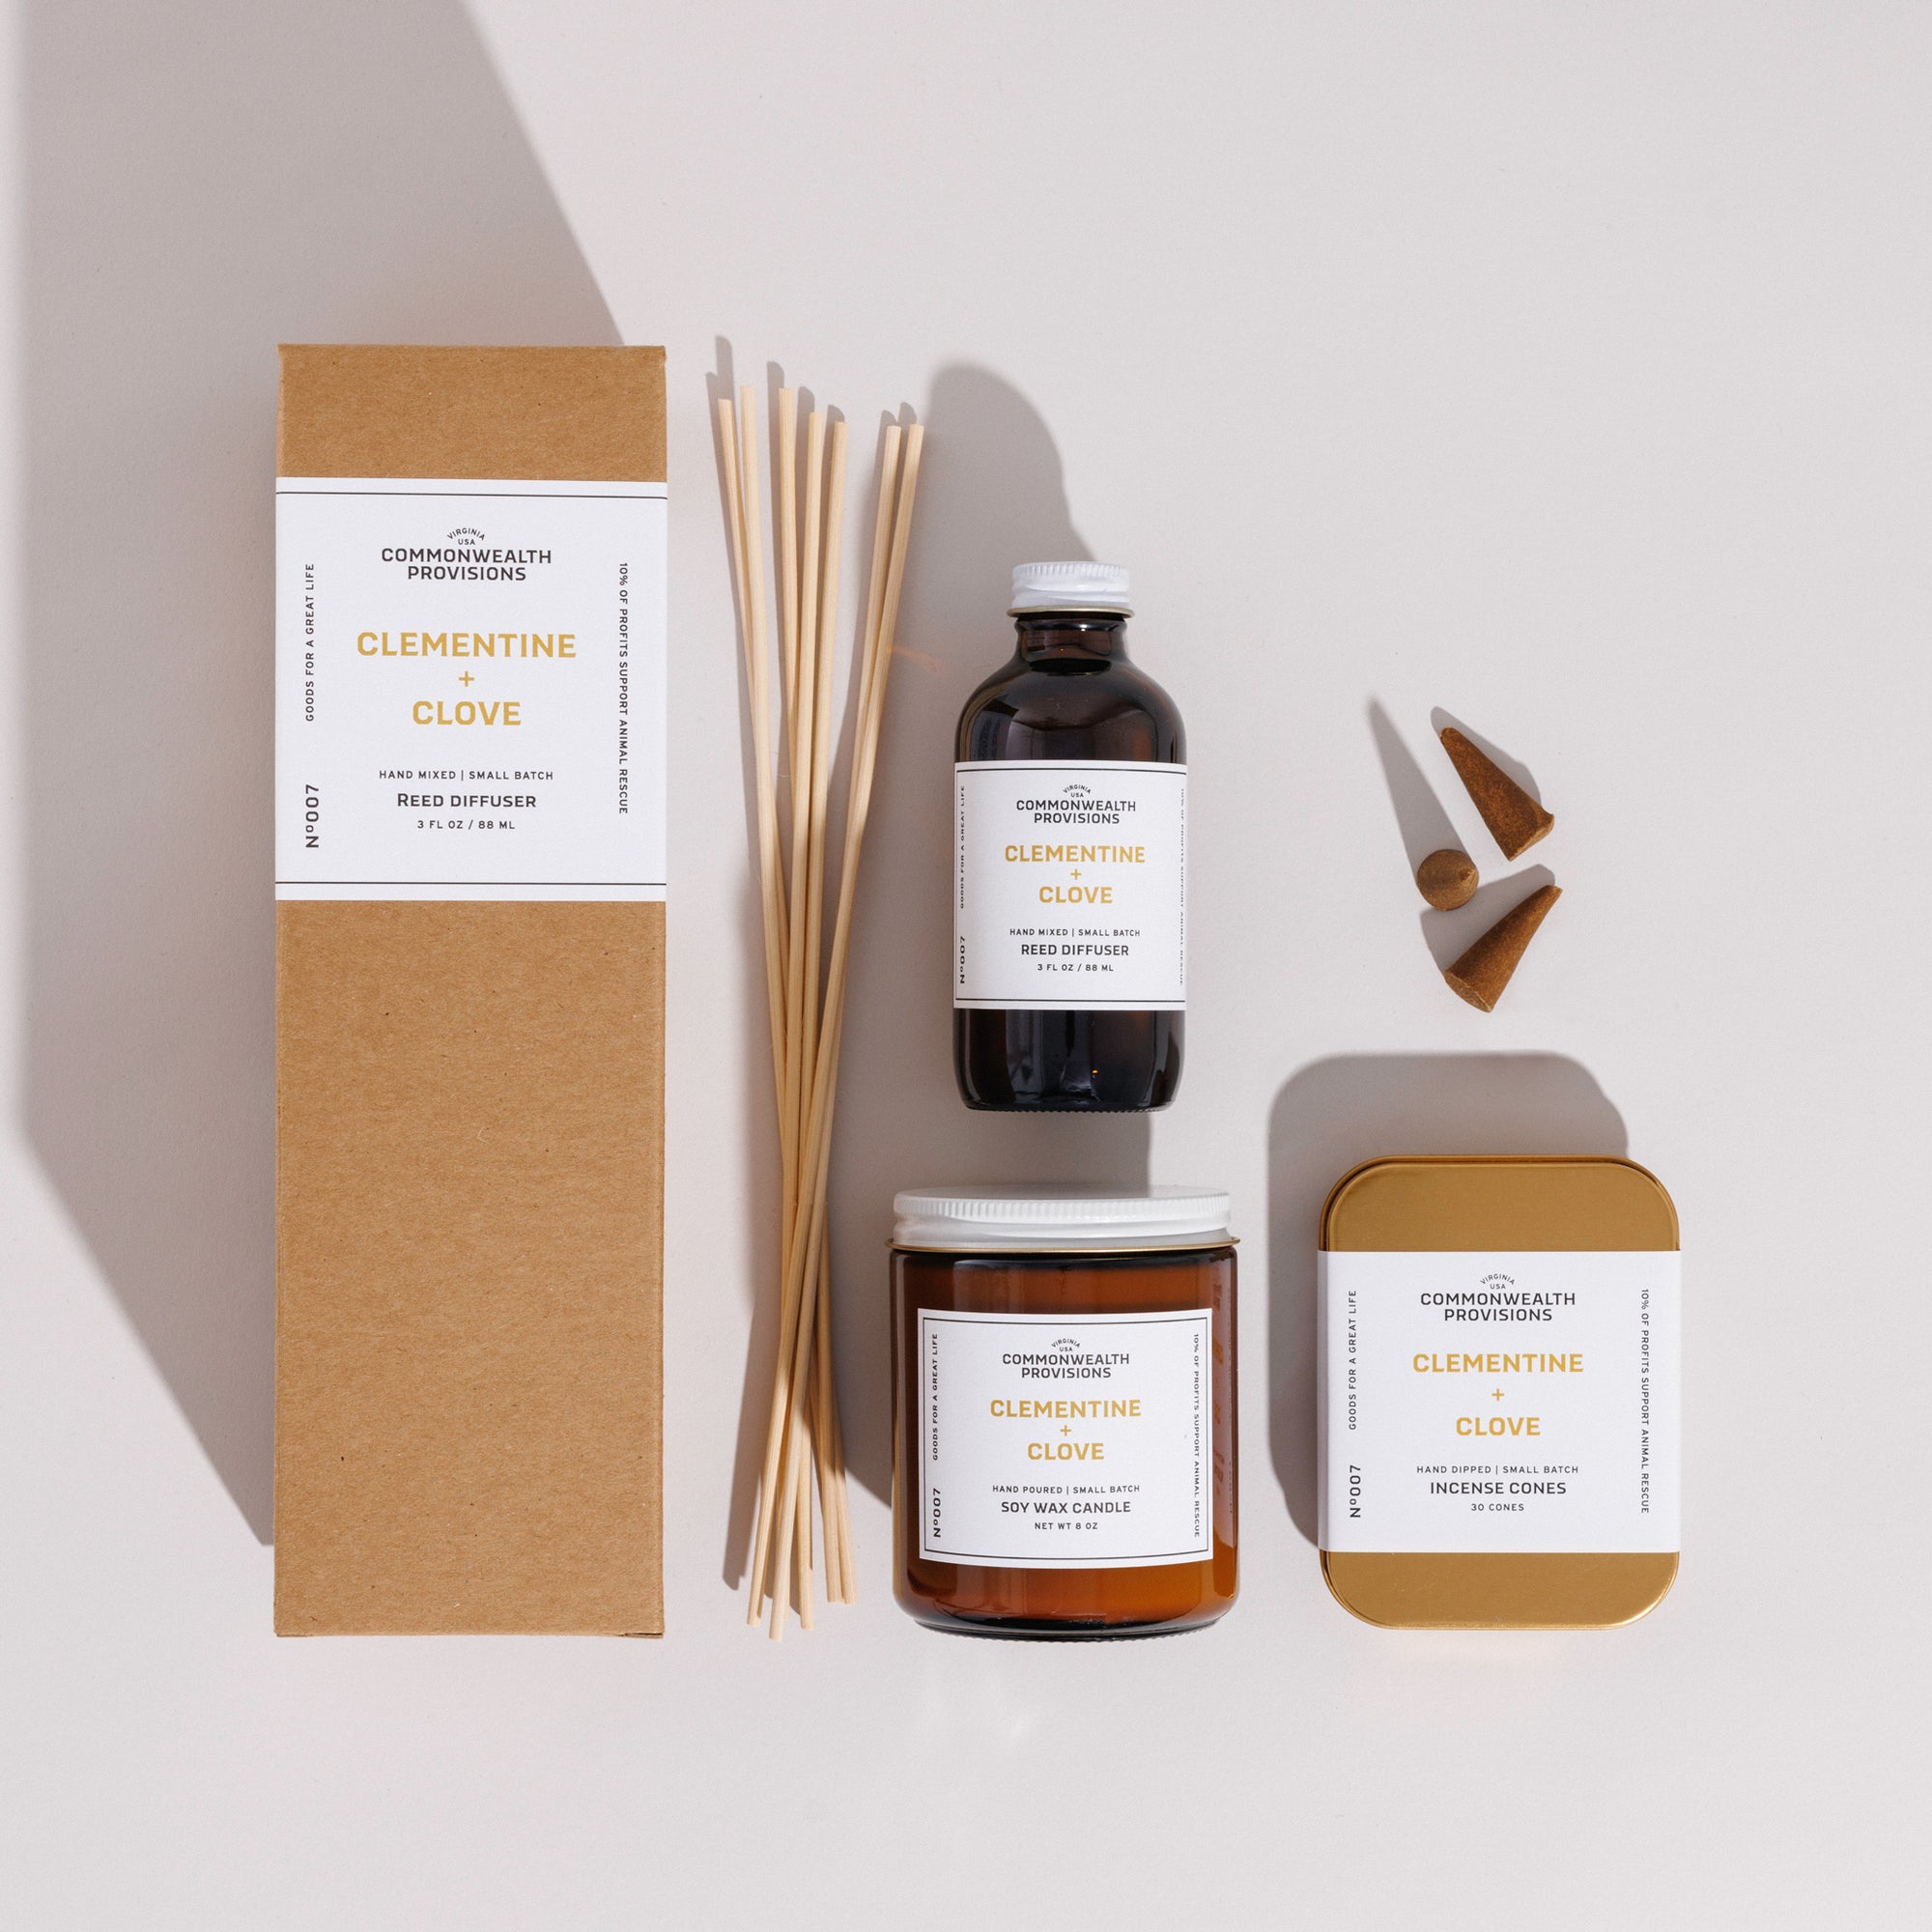 Clementine + Clove Collection | Commonwealth Provisions